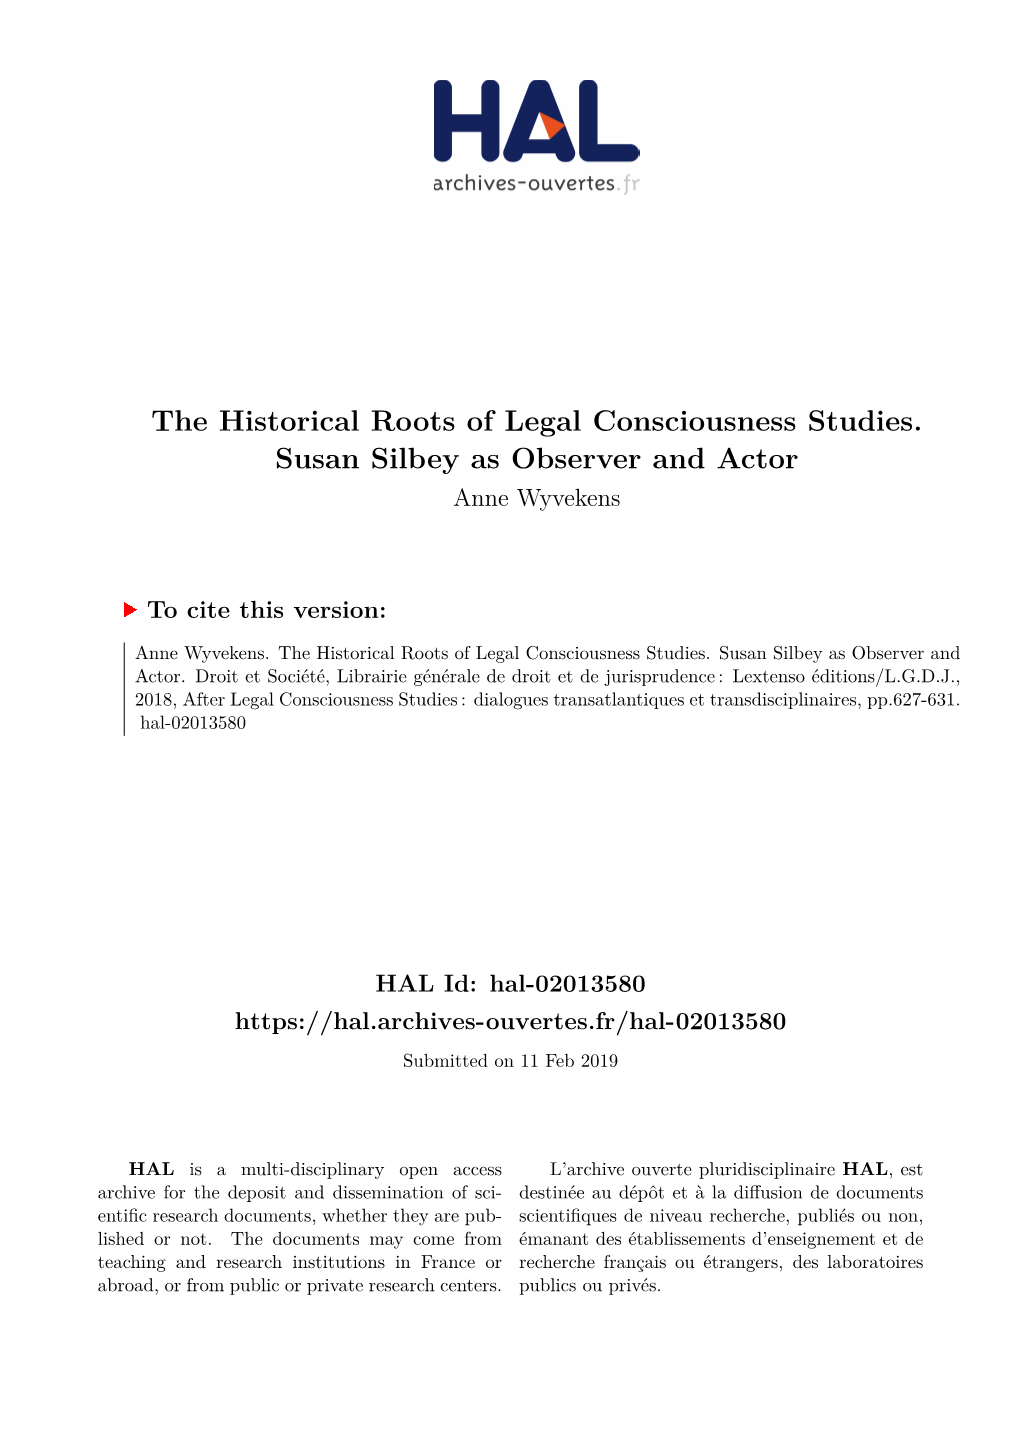 The Historical Roots of Legal Consciousness Studies. Susan Silbey As Observer and Actor Anne Wyvekens